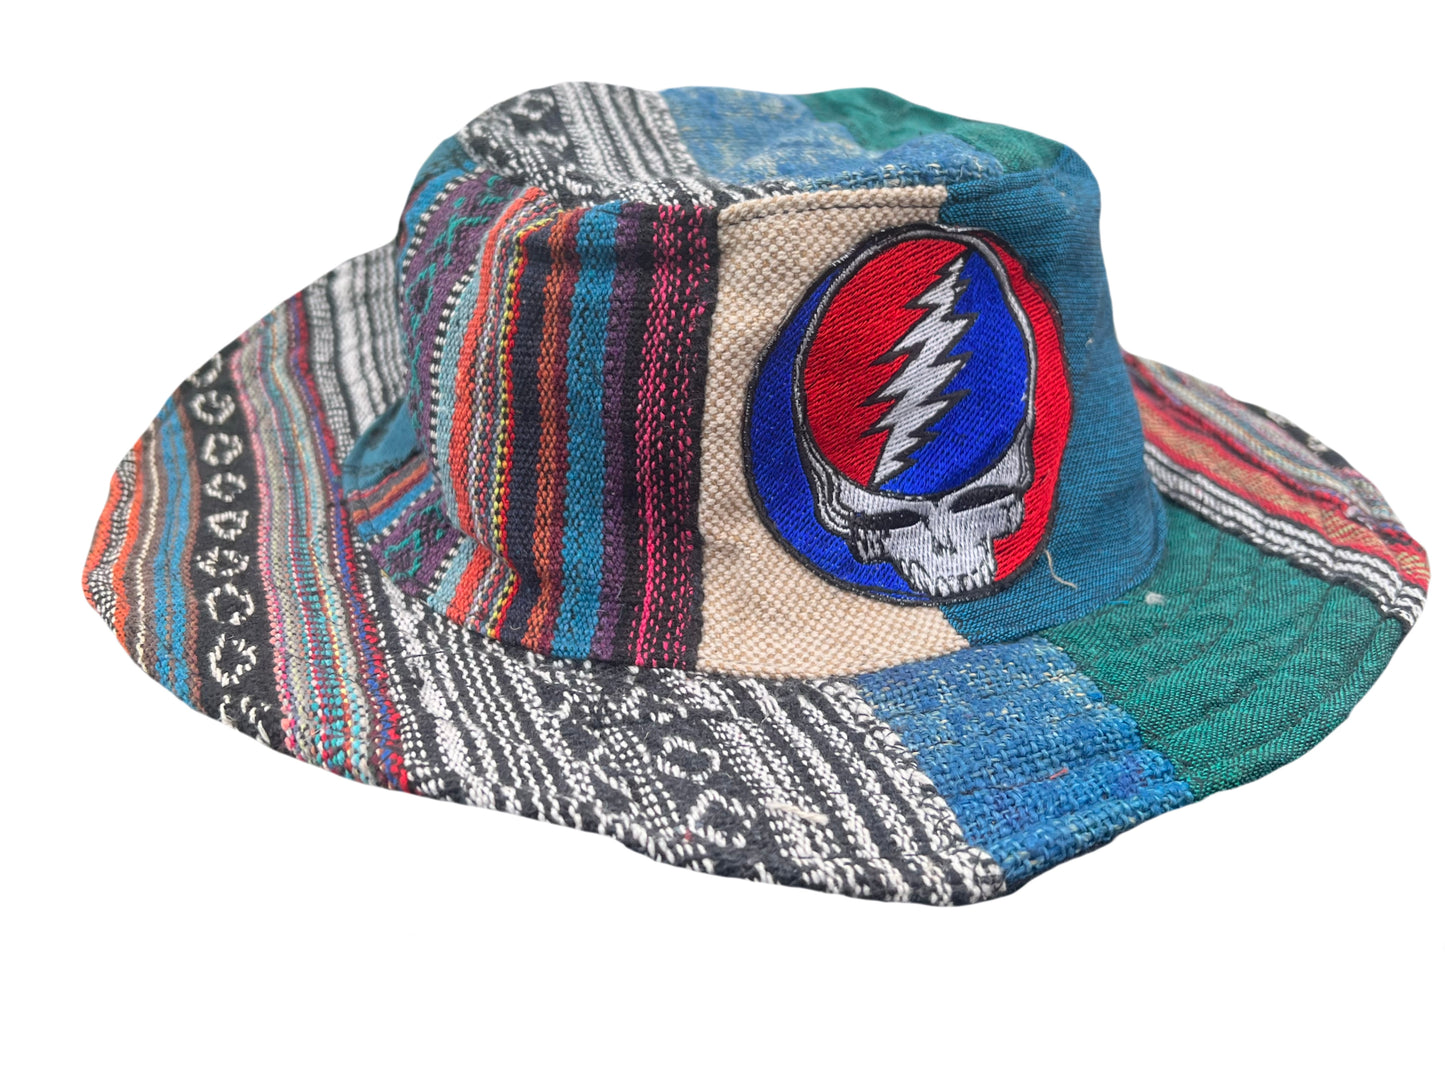 Steal Your Face hemp hat